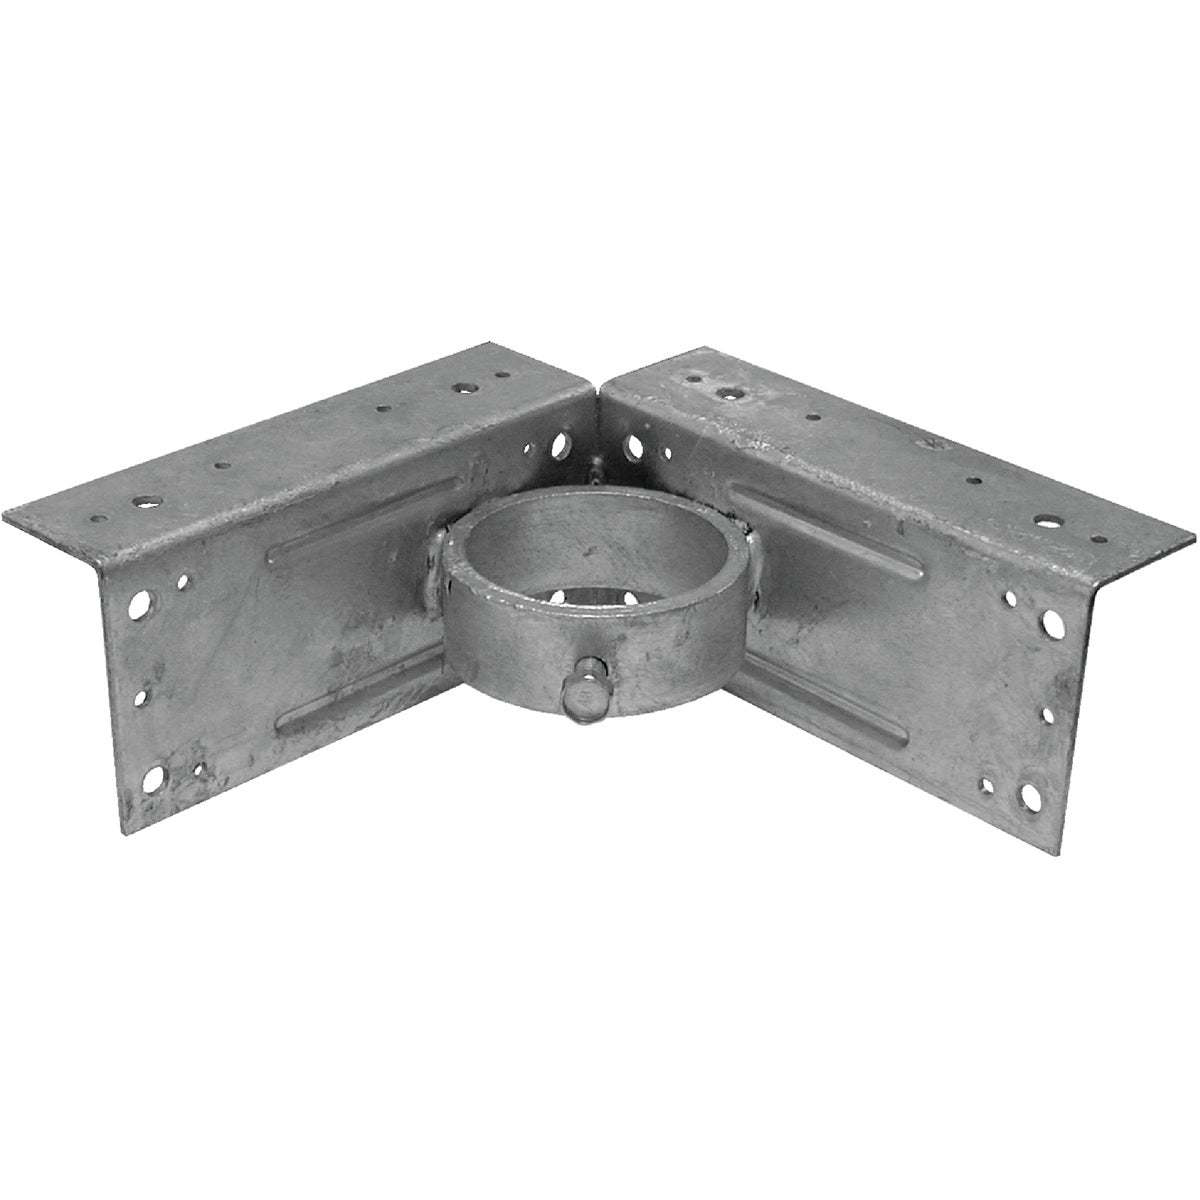 Midwest Air Technologies Midwest Air Tech 328595C Midwest Air Tech Corner 2-3/8 in. Steel Fence Post Adapter Clamp 328595C